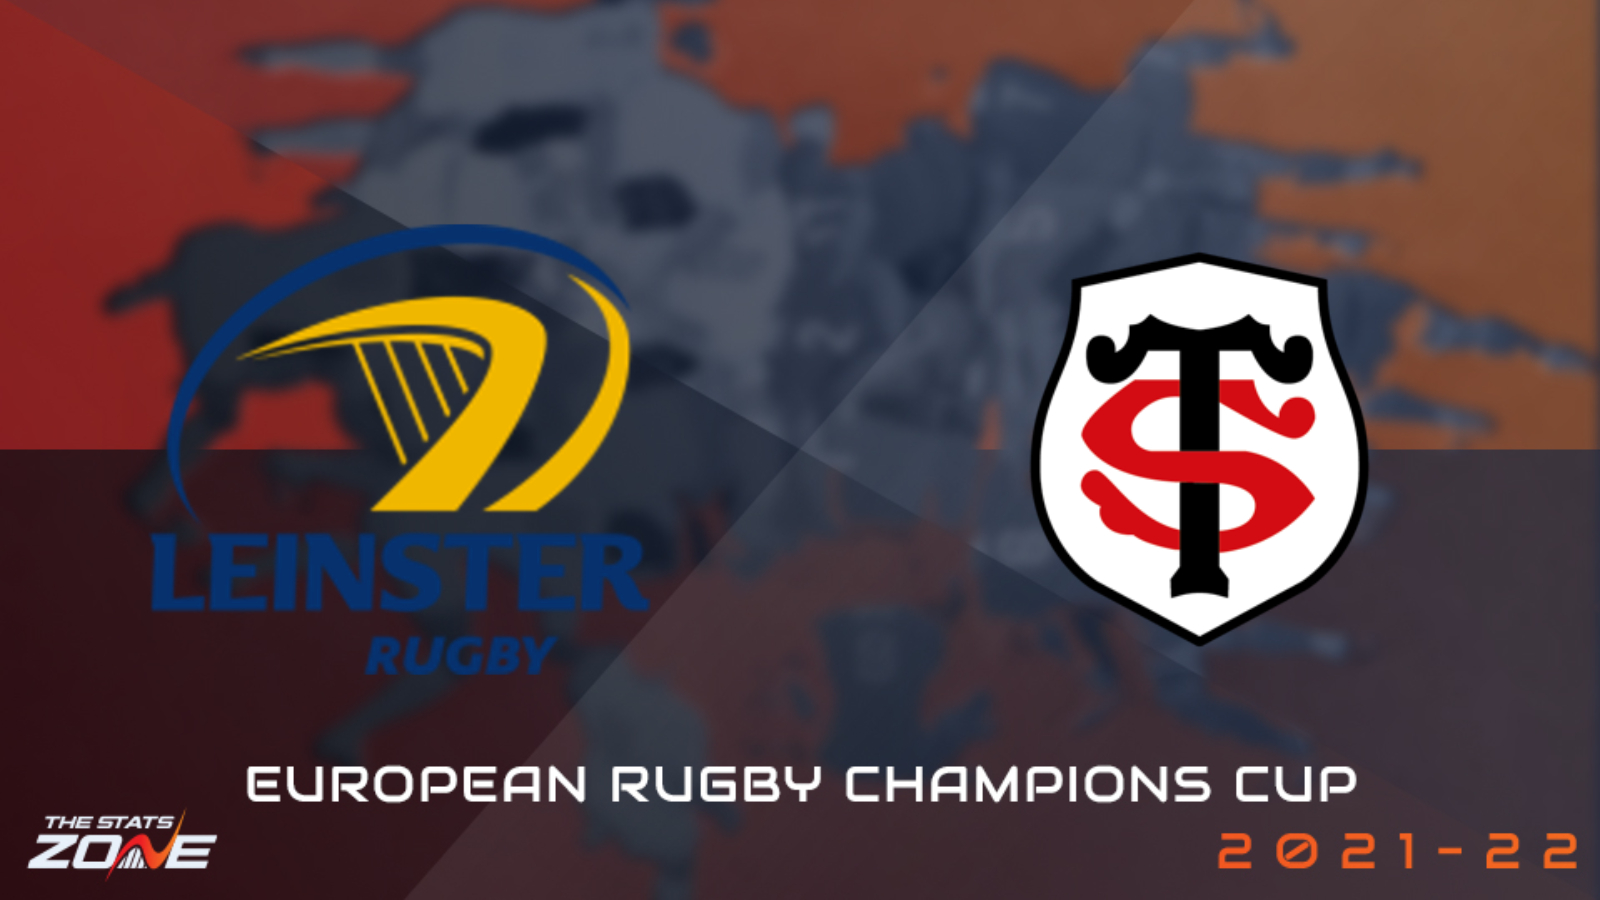 Leinster Vs Toulouse European Rugby Champions Cup 2122 Background 